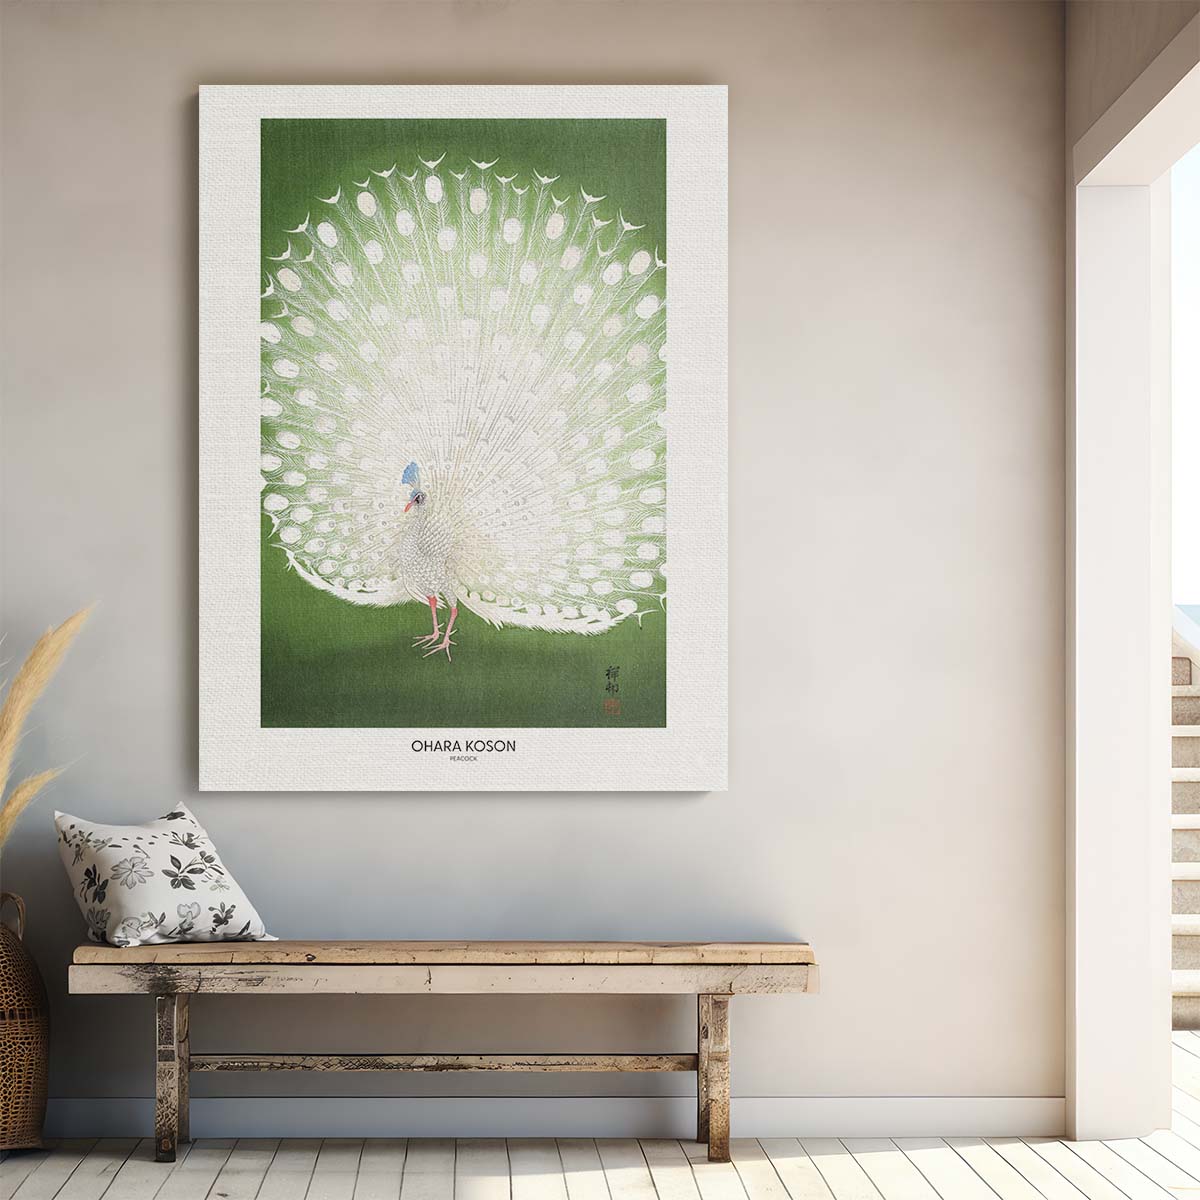 Vintage Japanese Peacock Illustration by Master Artist Ohara Koson by Luxuriance Designs, made in USA